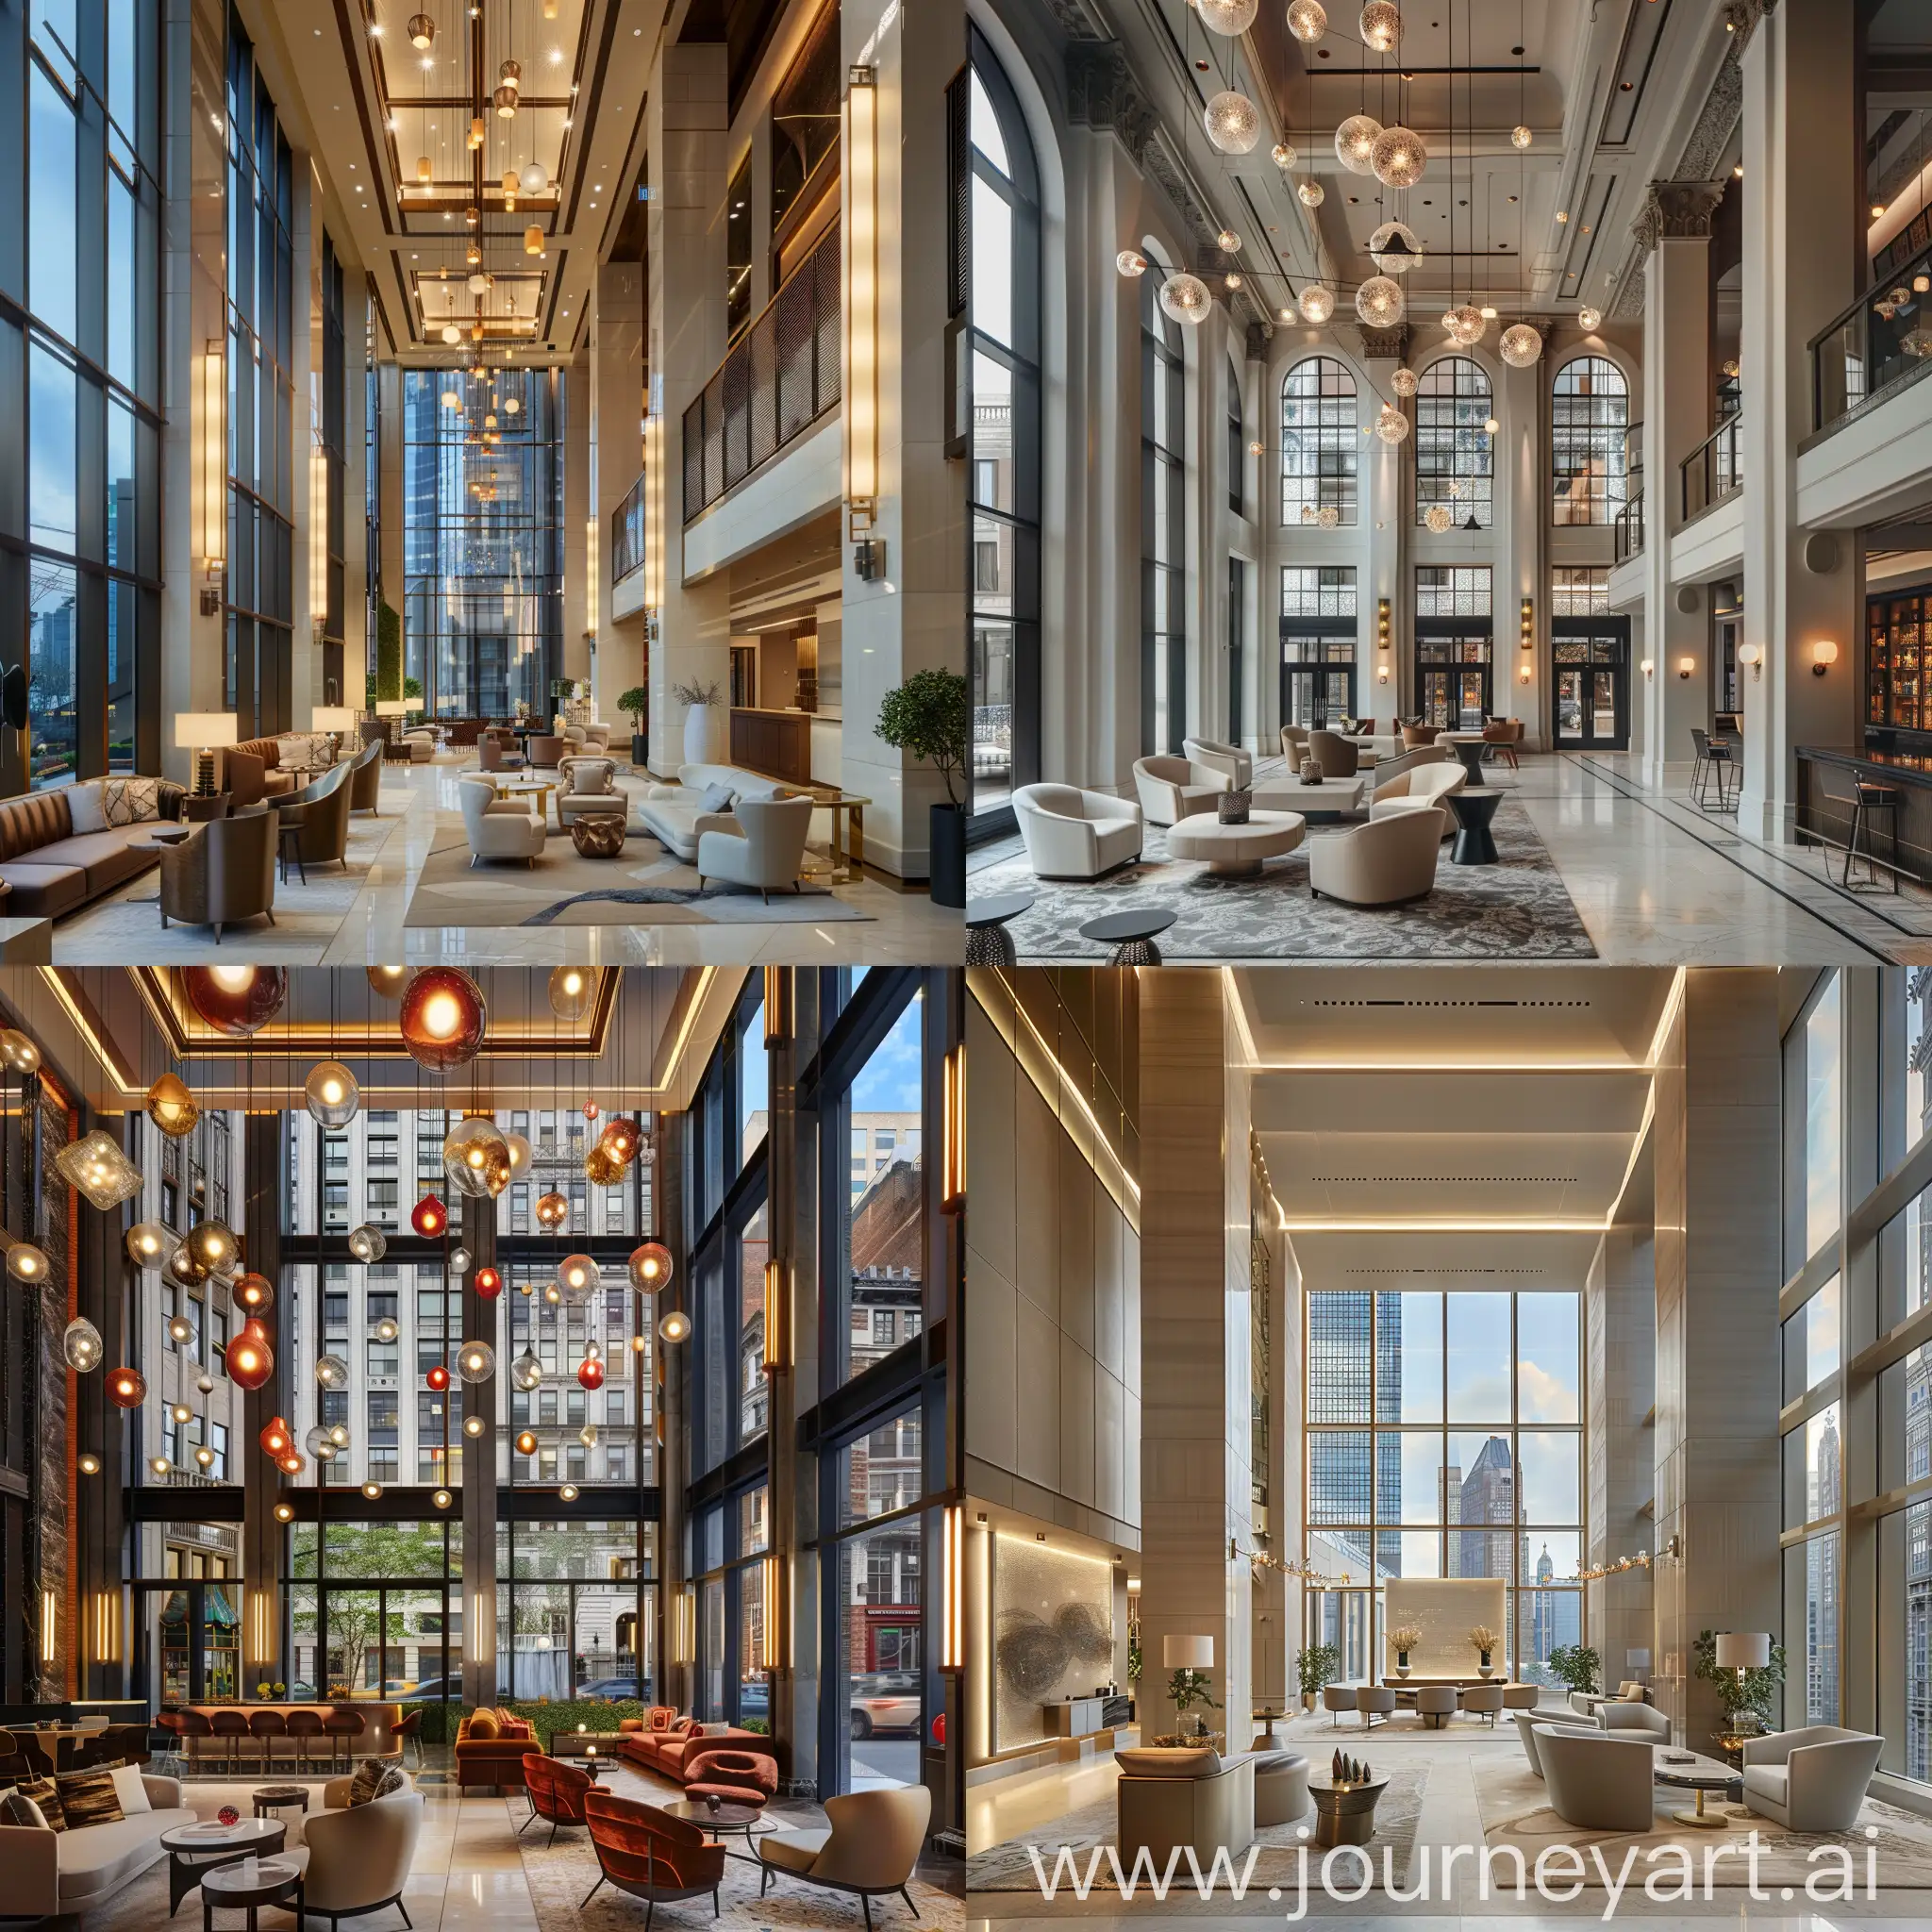 Luxurious-NeoCosmic-Hotel-Lobby-with-FloortoCeiling-Windows-and-Designer-French-Furniture